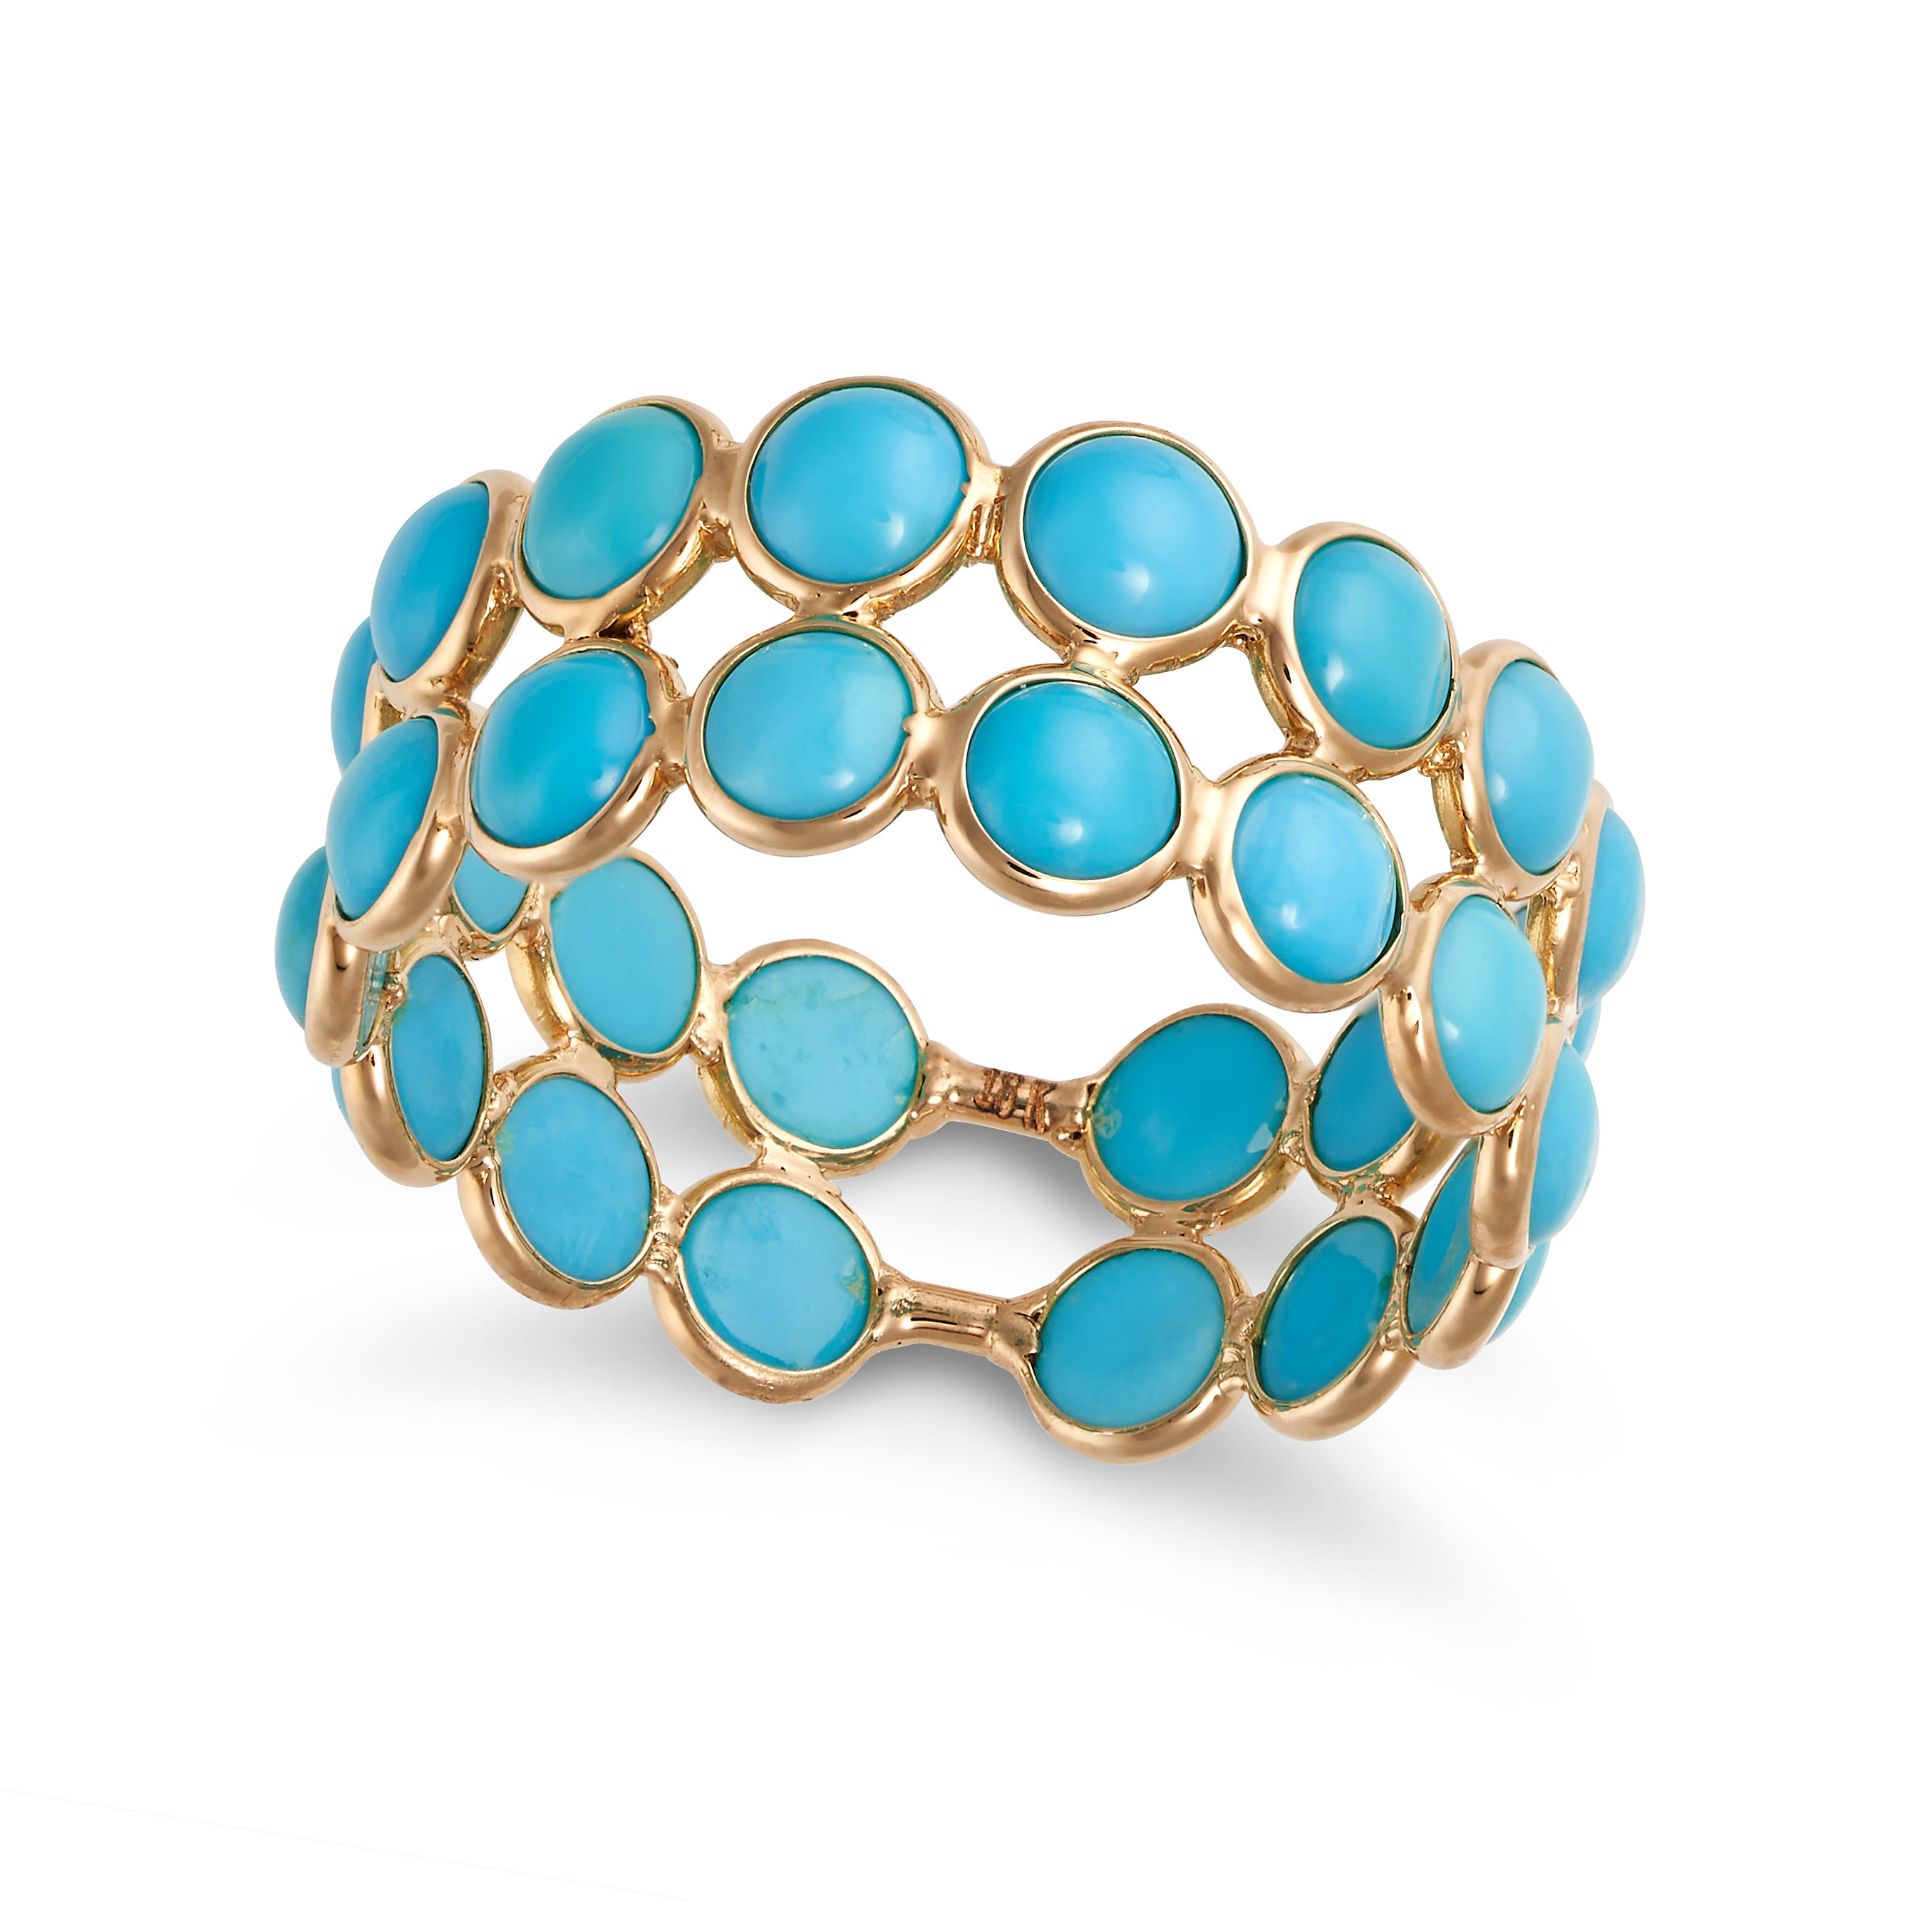 A TURQUOISE ETERNITY RING in 18ct yellow gold, set all around with two rows of round cabochon tur...